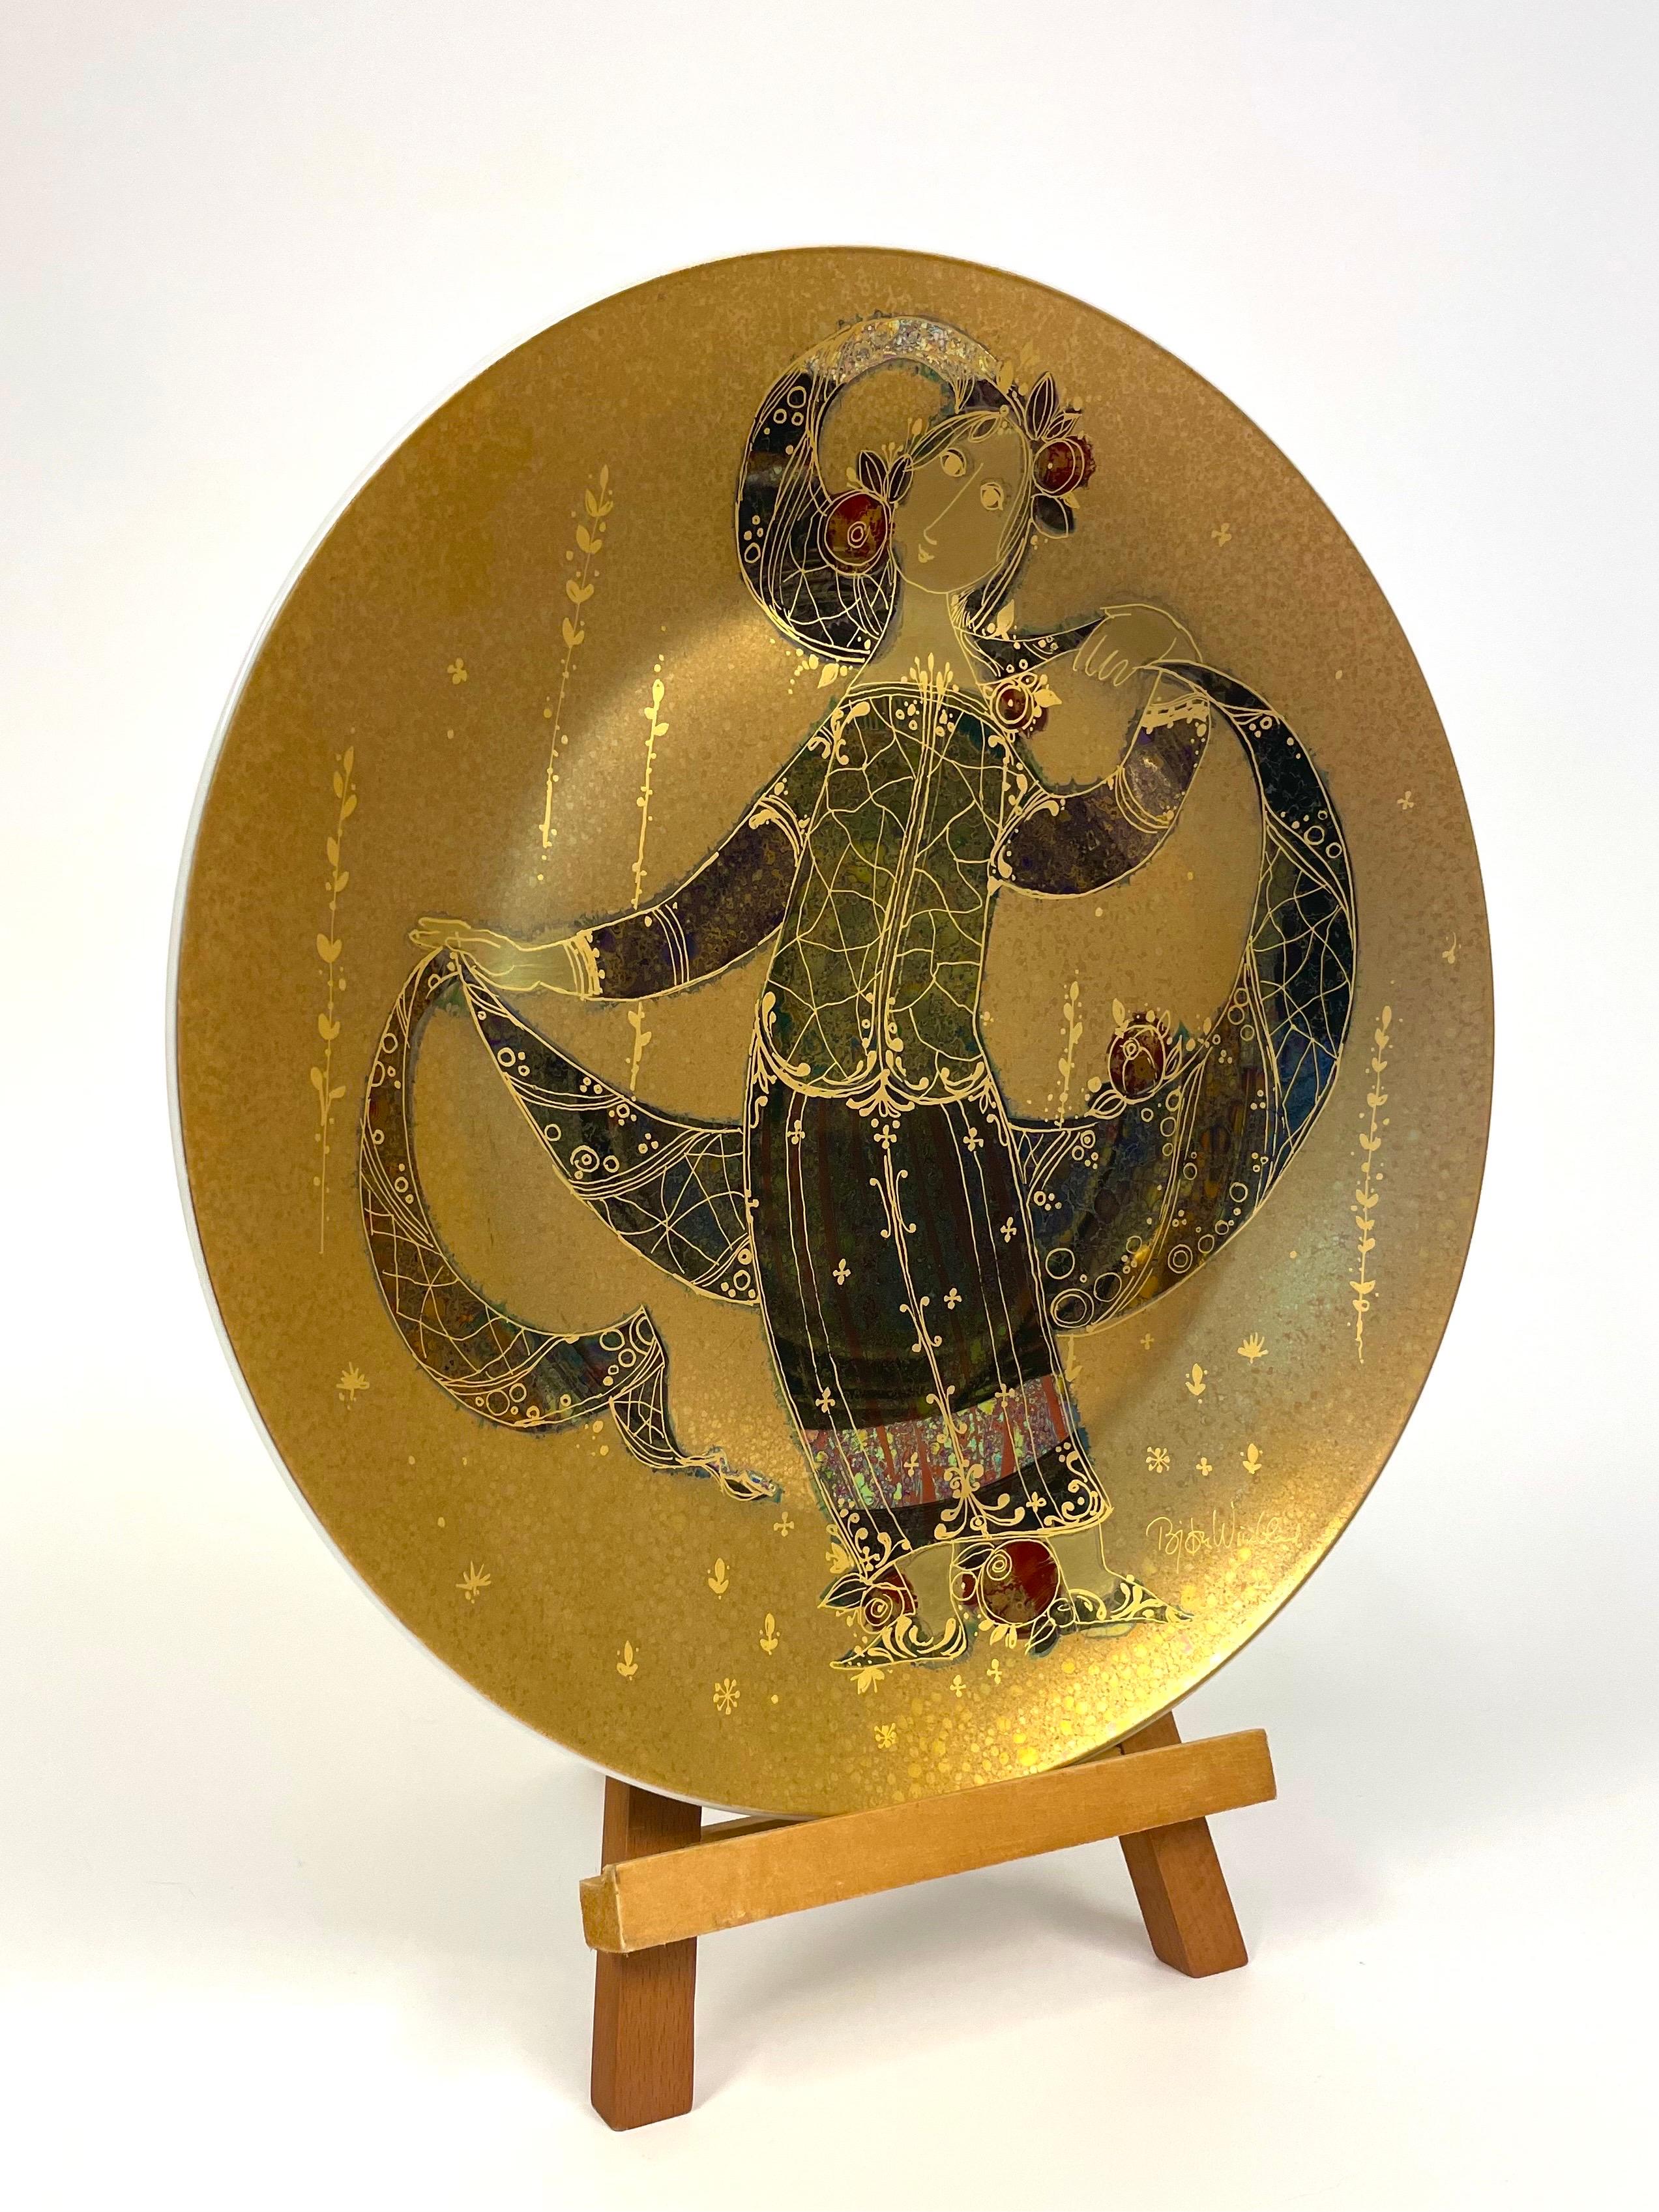 This is a large German porcelain platter from Rosenthal, designed 1979 by Bjørn Wiinbladh, Denmark for the company’s 100-years anniversary.
It comes hand painted and partly metal gilded.

The platter measures:
Ø 33 cm.
H 3.5